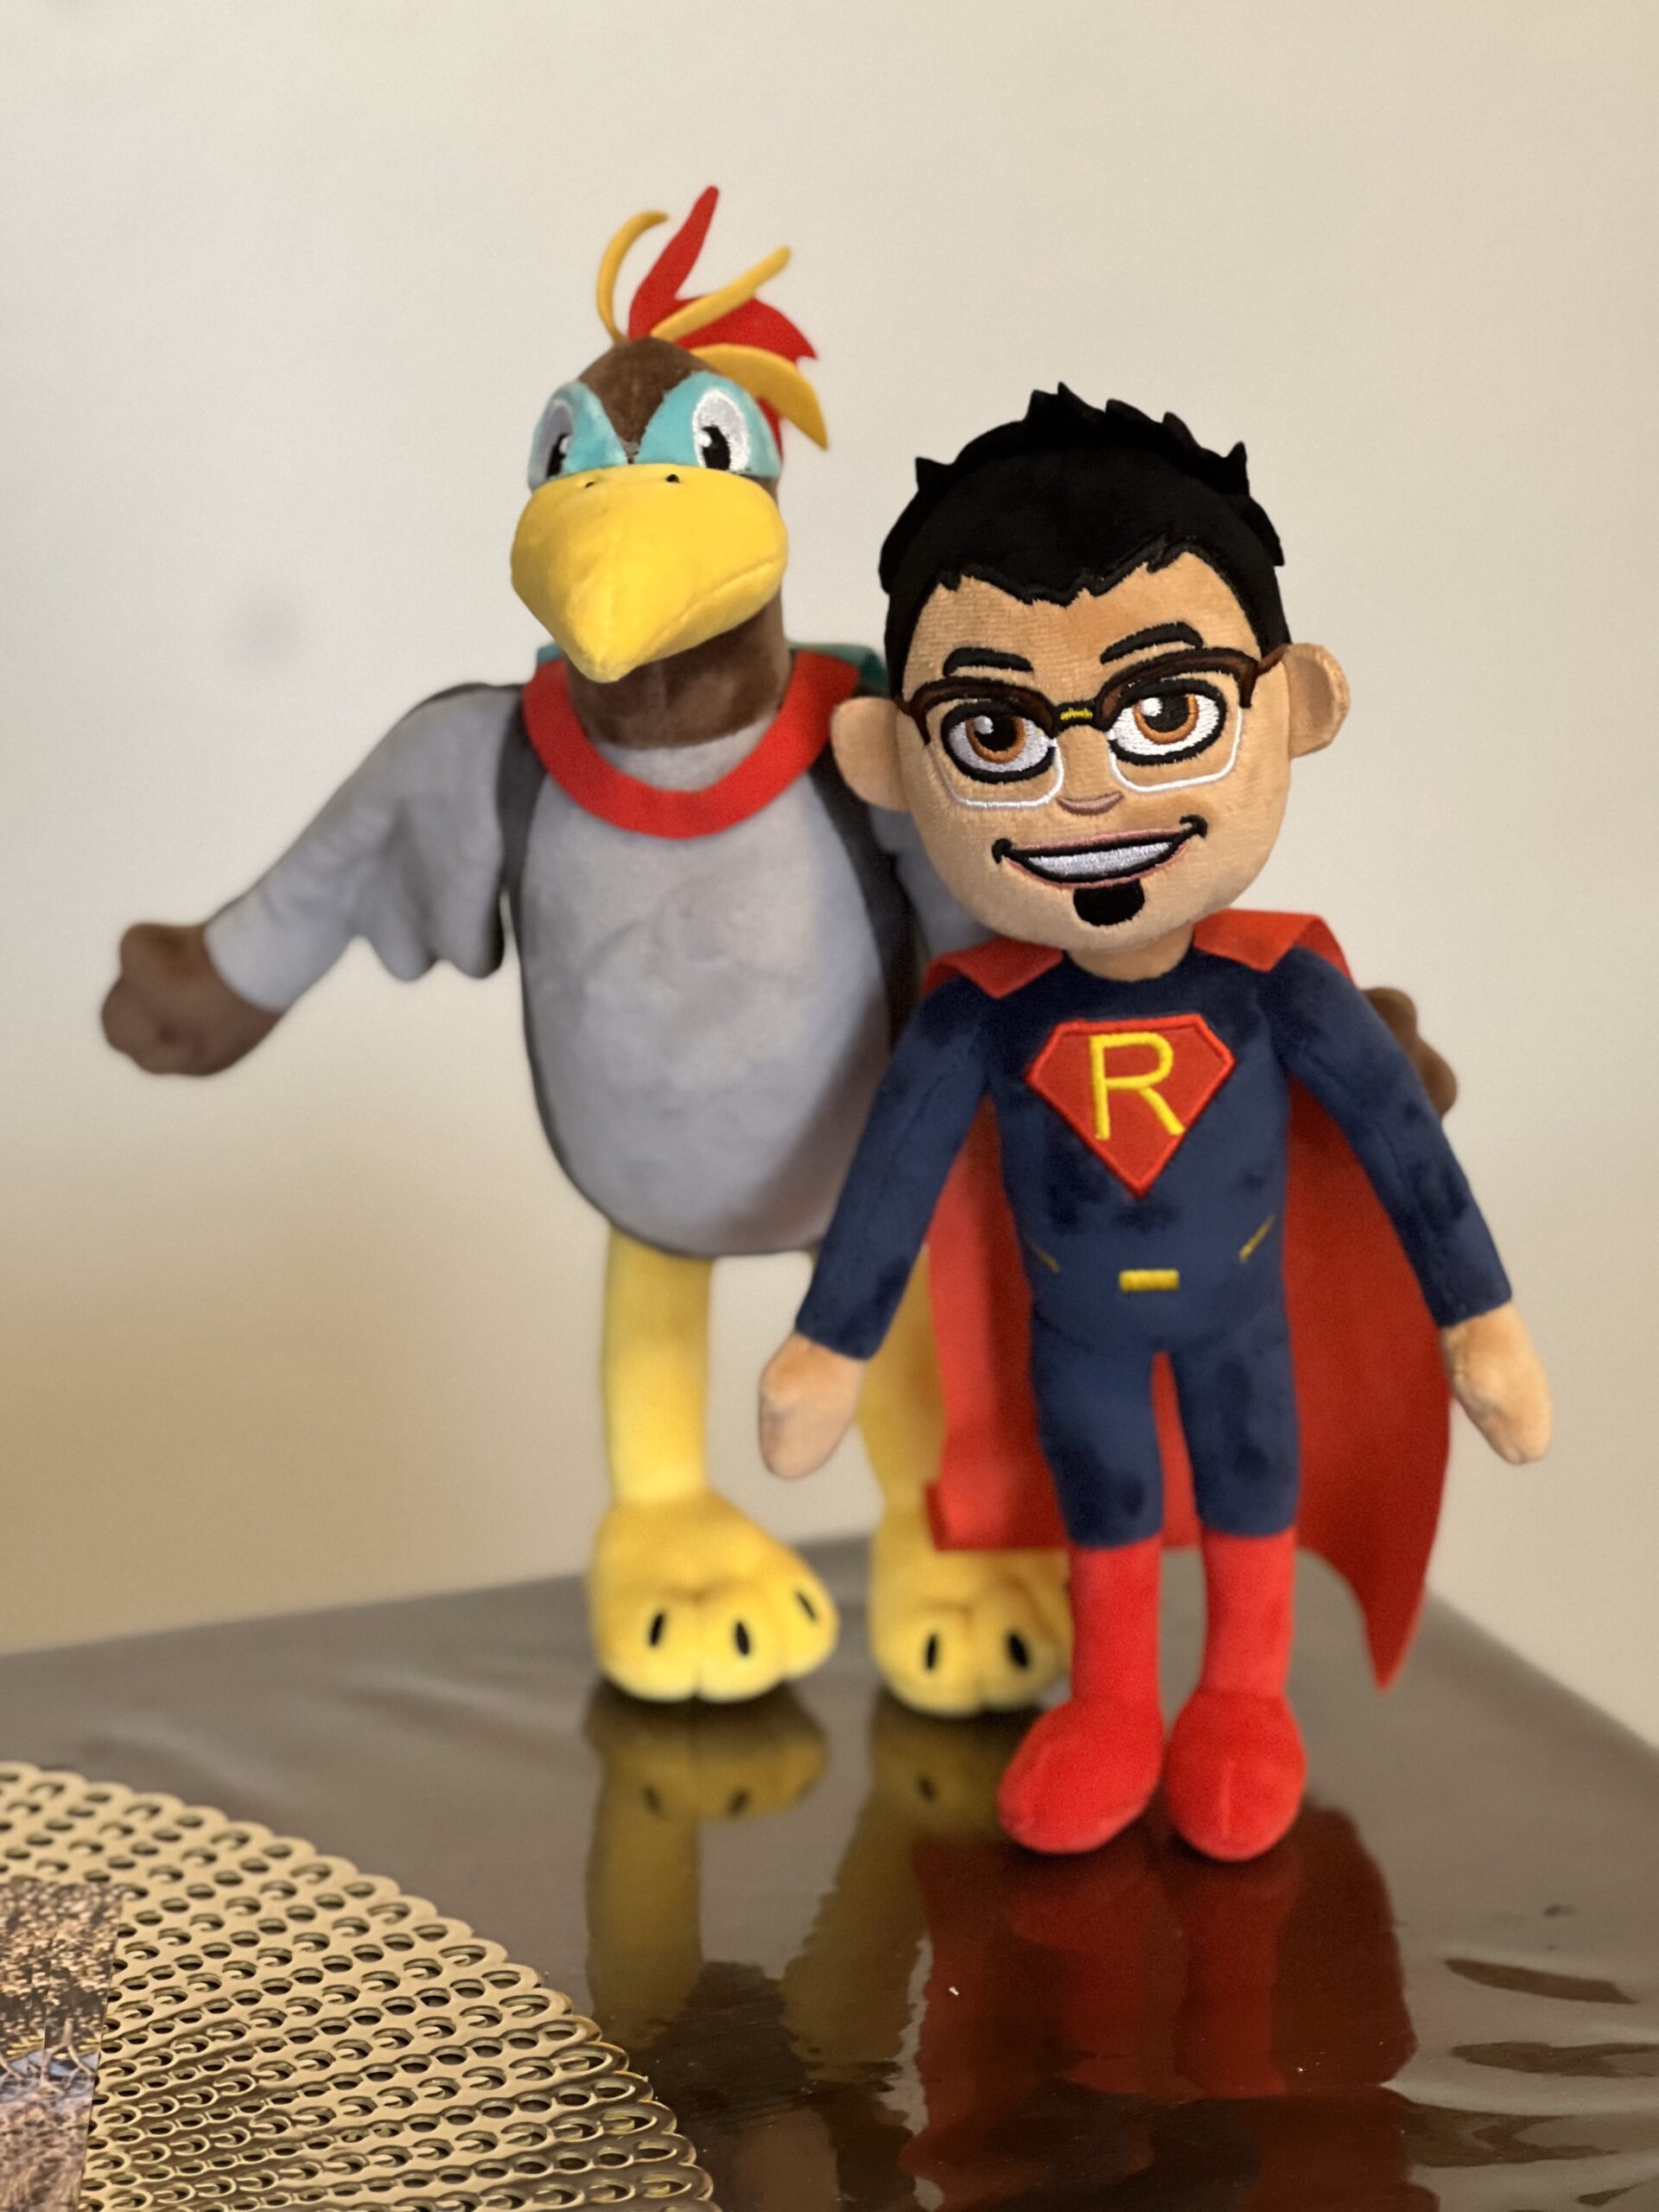 Ralph the Reader and Ricky the Roadrunner Mascots